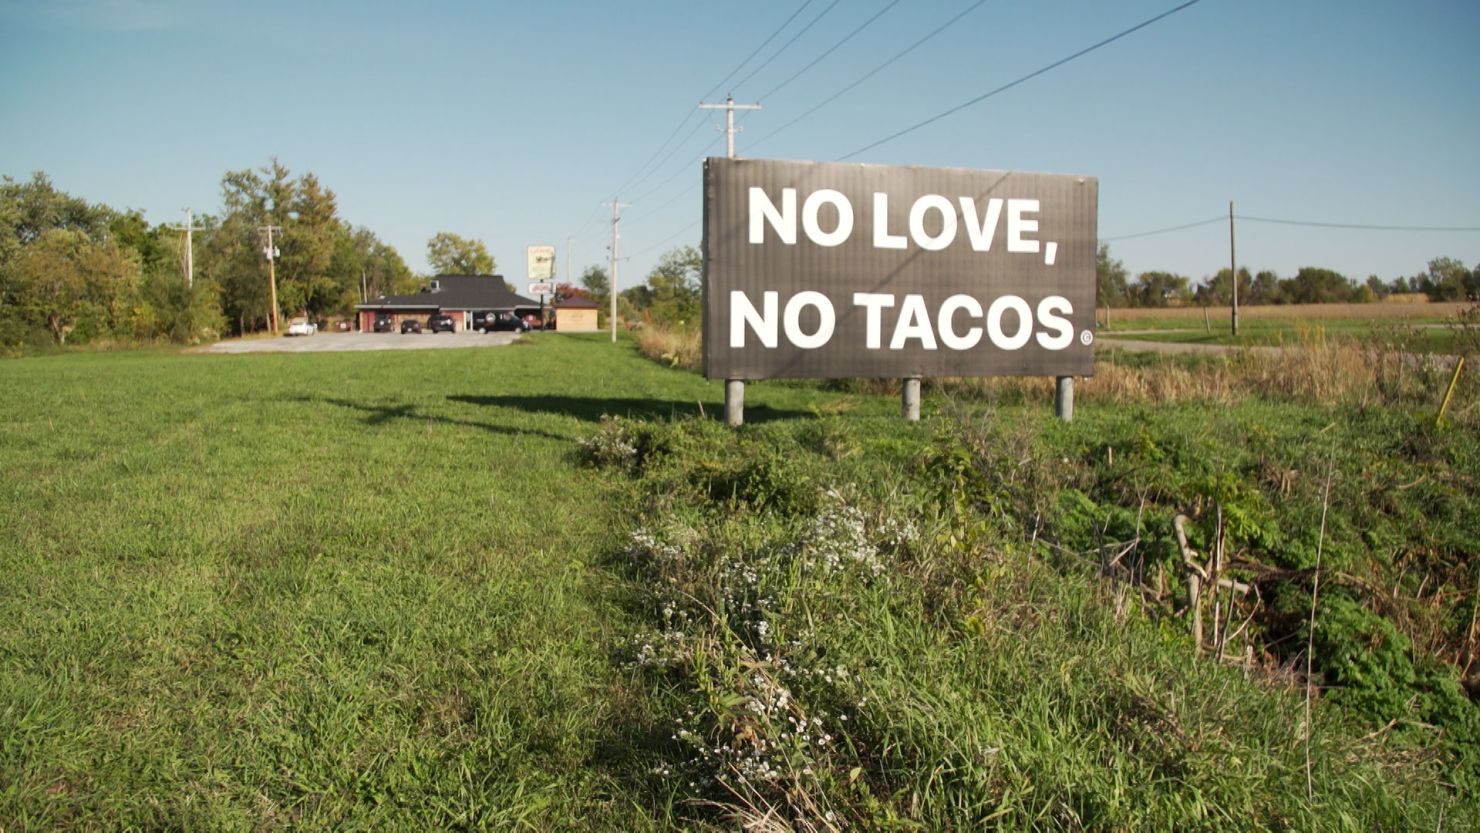 "No Love, No Tacos" is the accidental slogan of a Mexican restaurant in Iowa after a social media post by its owner went viral.